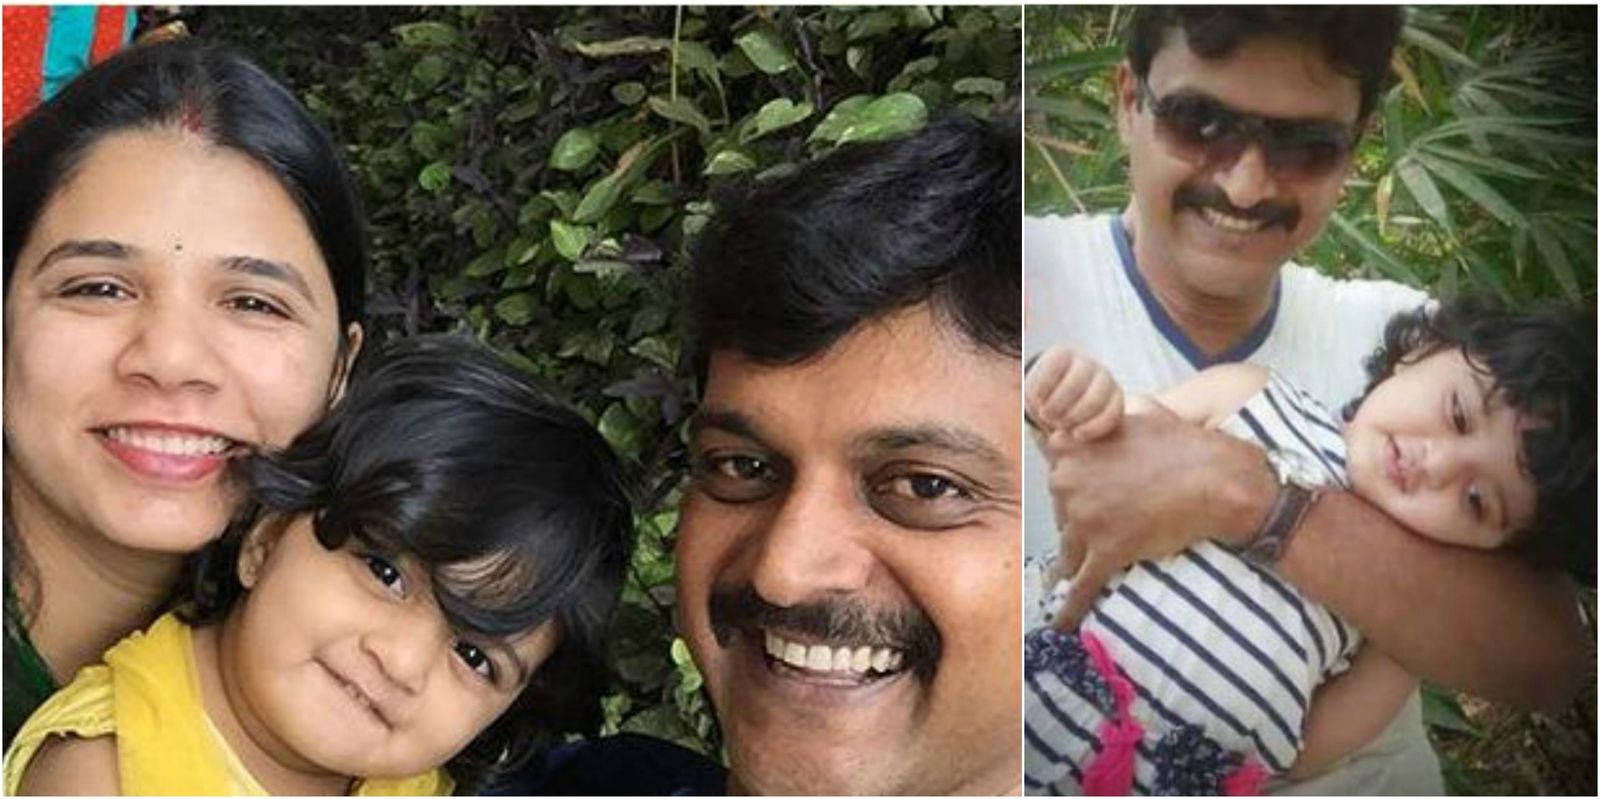 Pratish Vora Recollects The Horrific Incident That Took Away His 2 Year Old Daughter